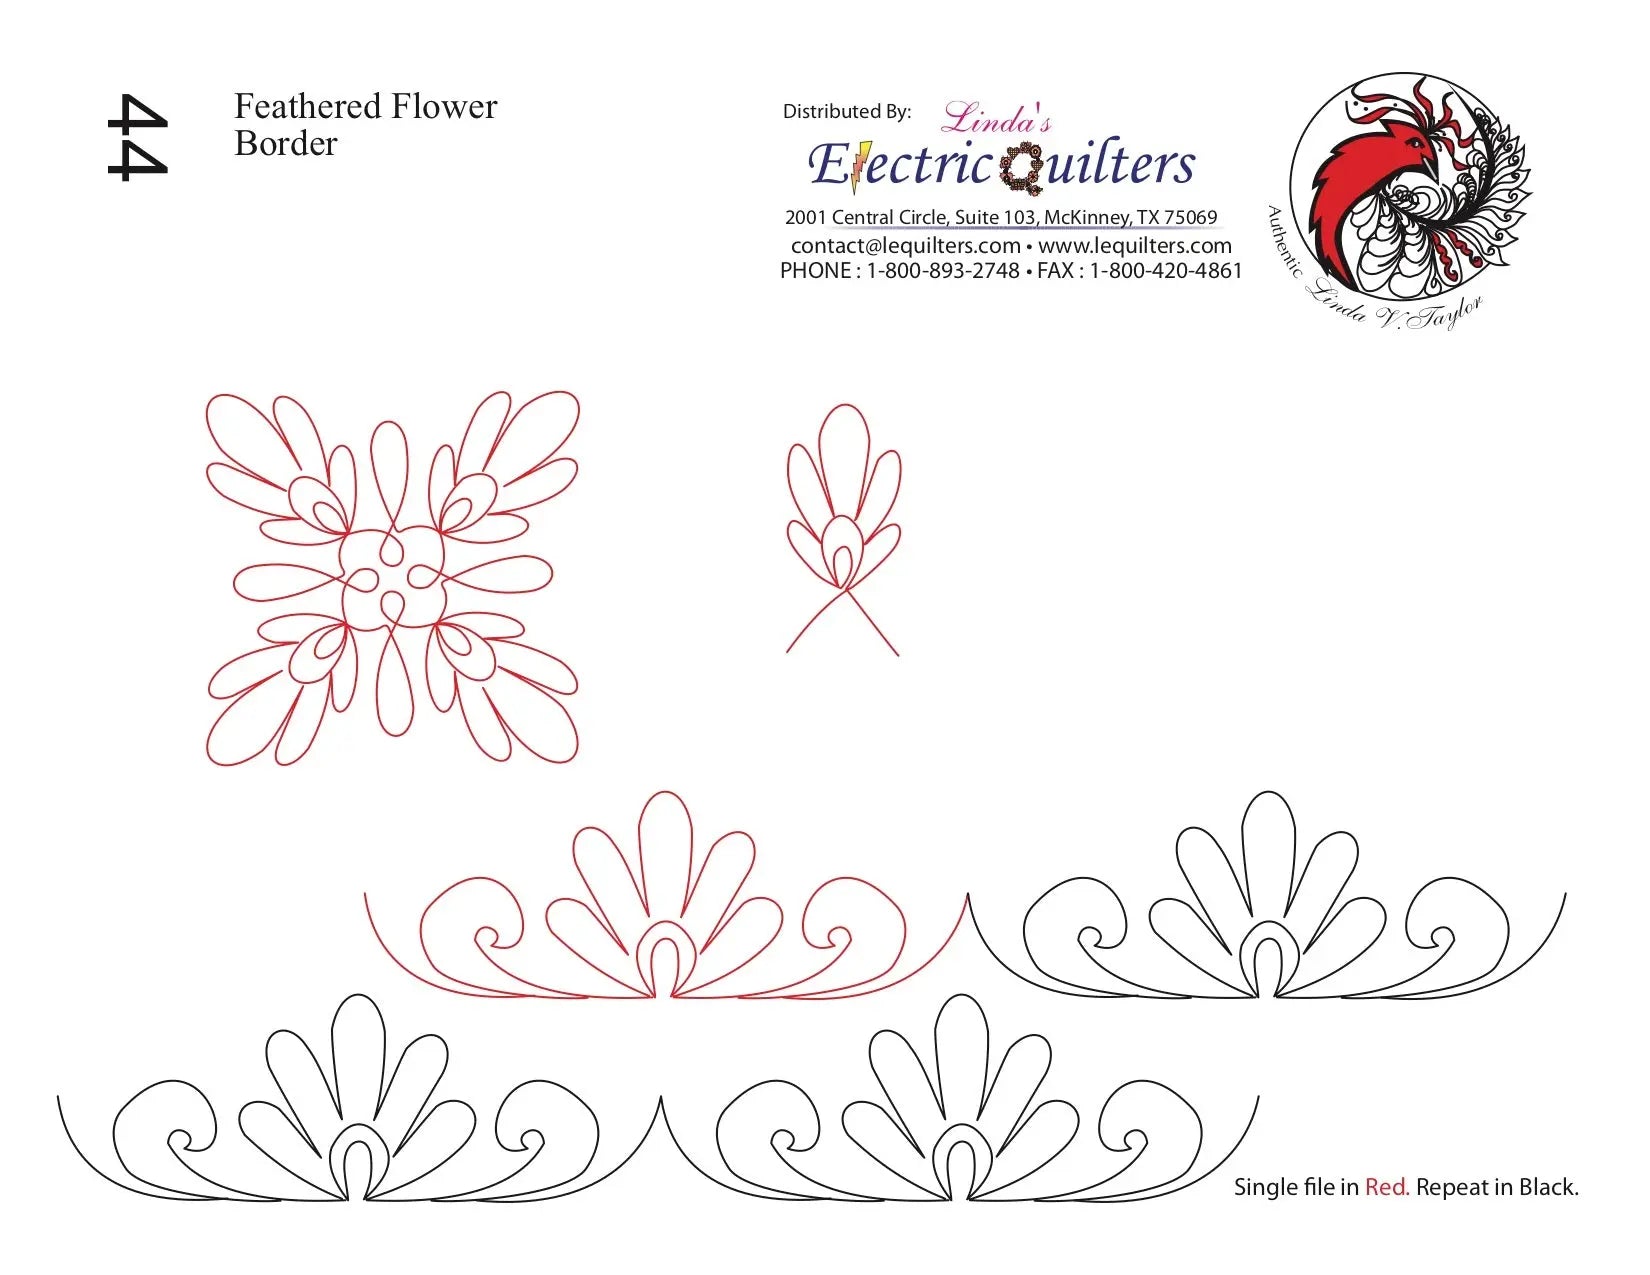 044 Feathered Flower Border Pantograph by Linda V. Taylor - Linda's Electric Quilters